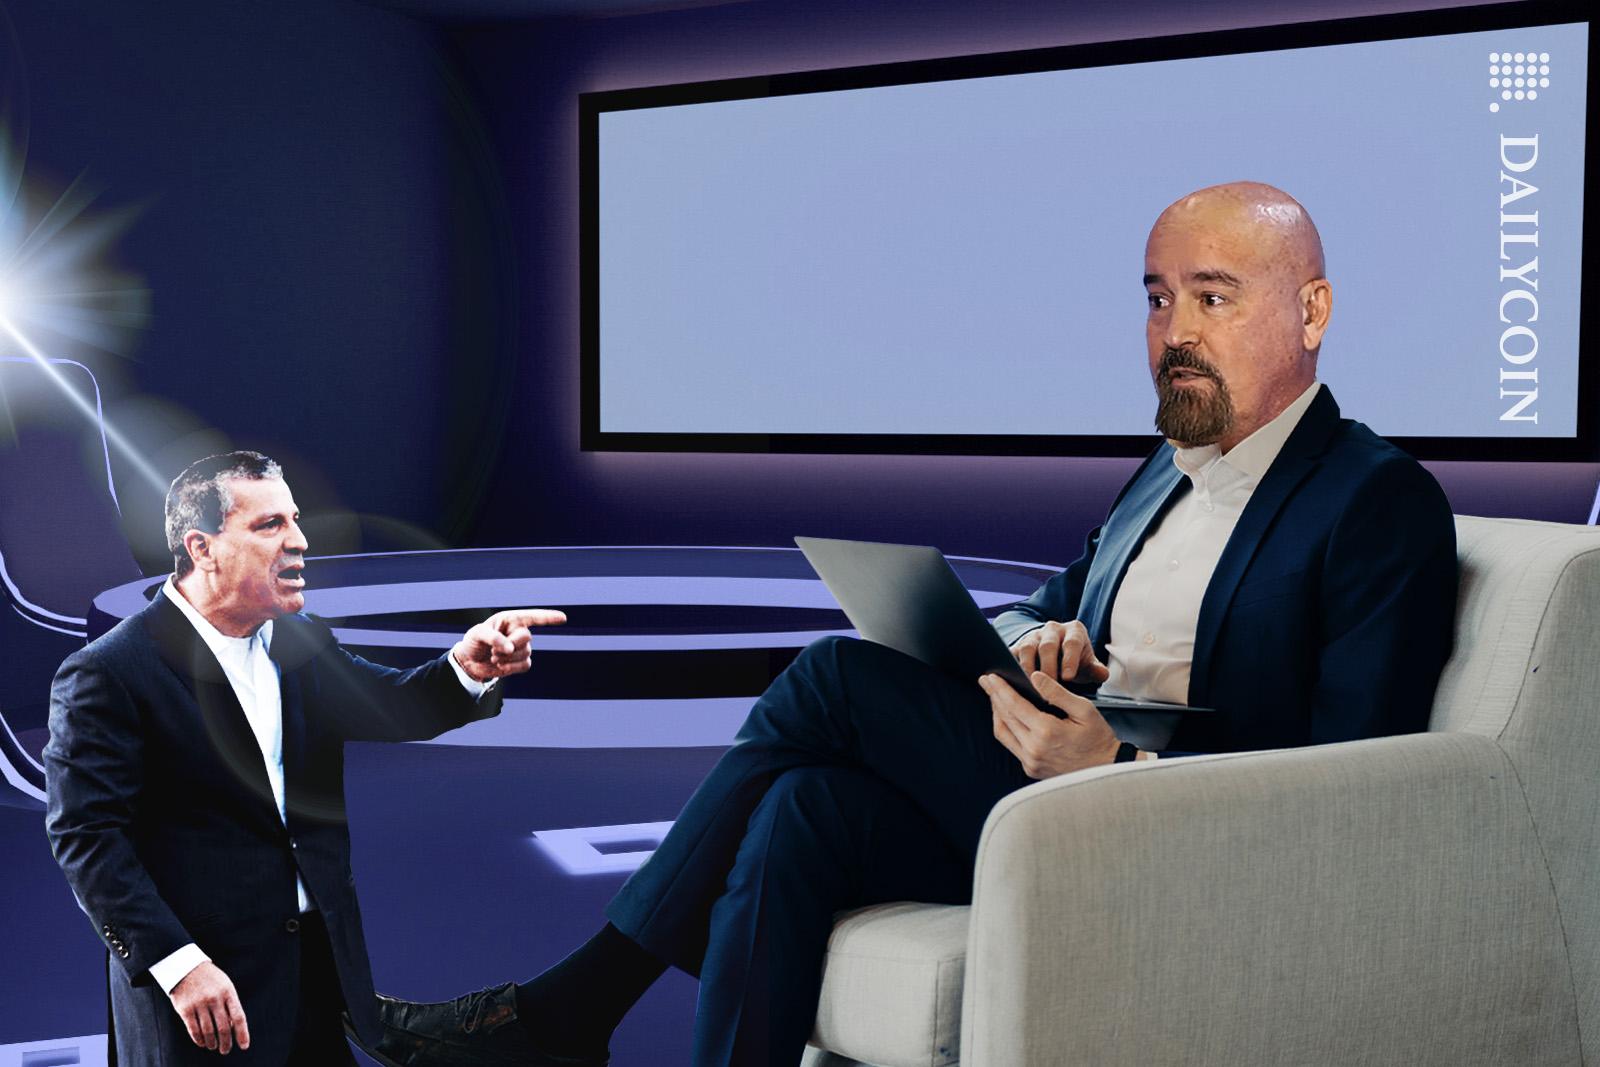 John Deaton is being shouted at by a small Charlie Gasparino in a futuristic room.